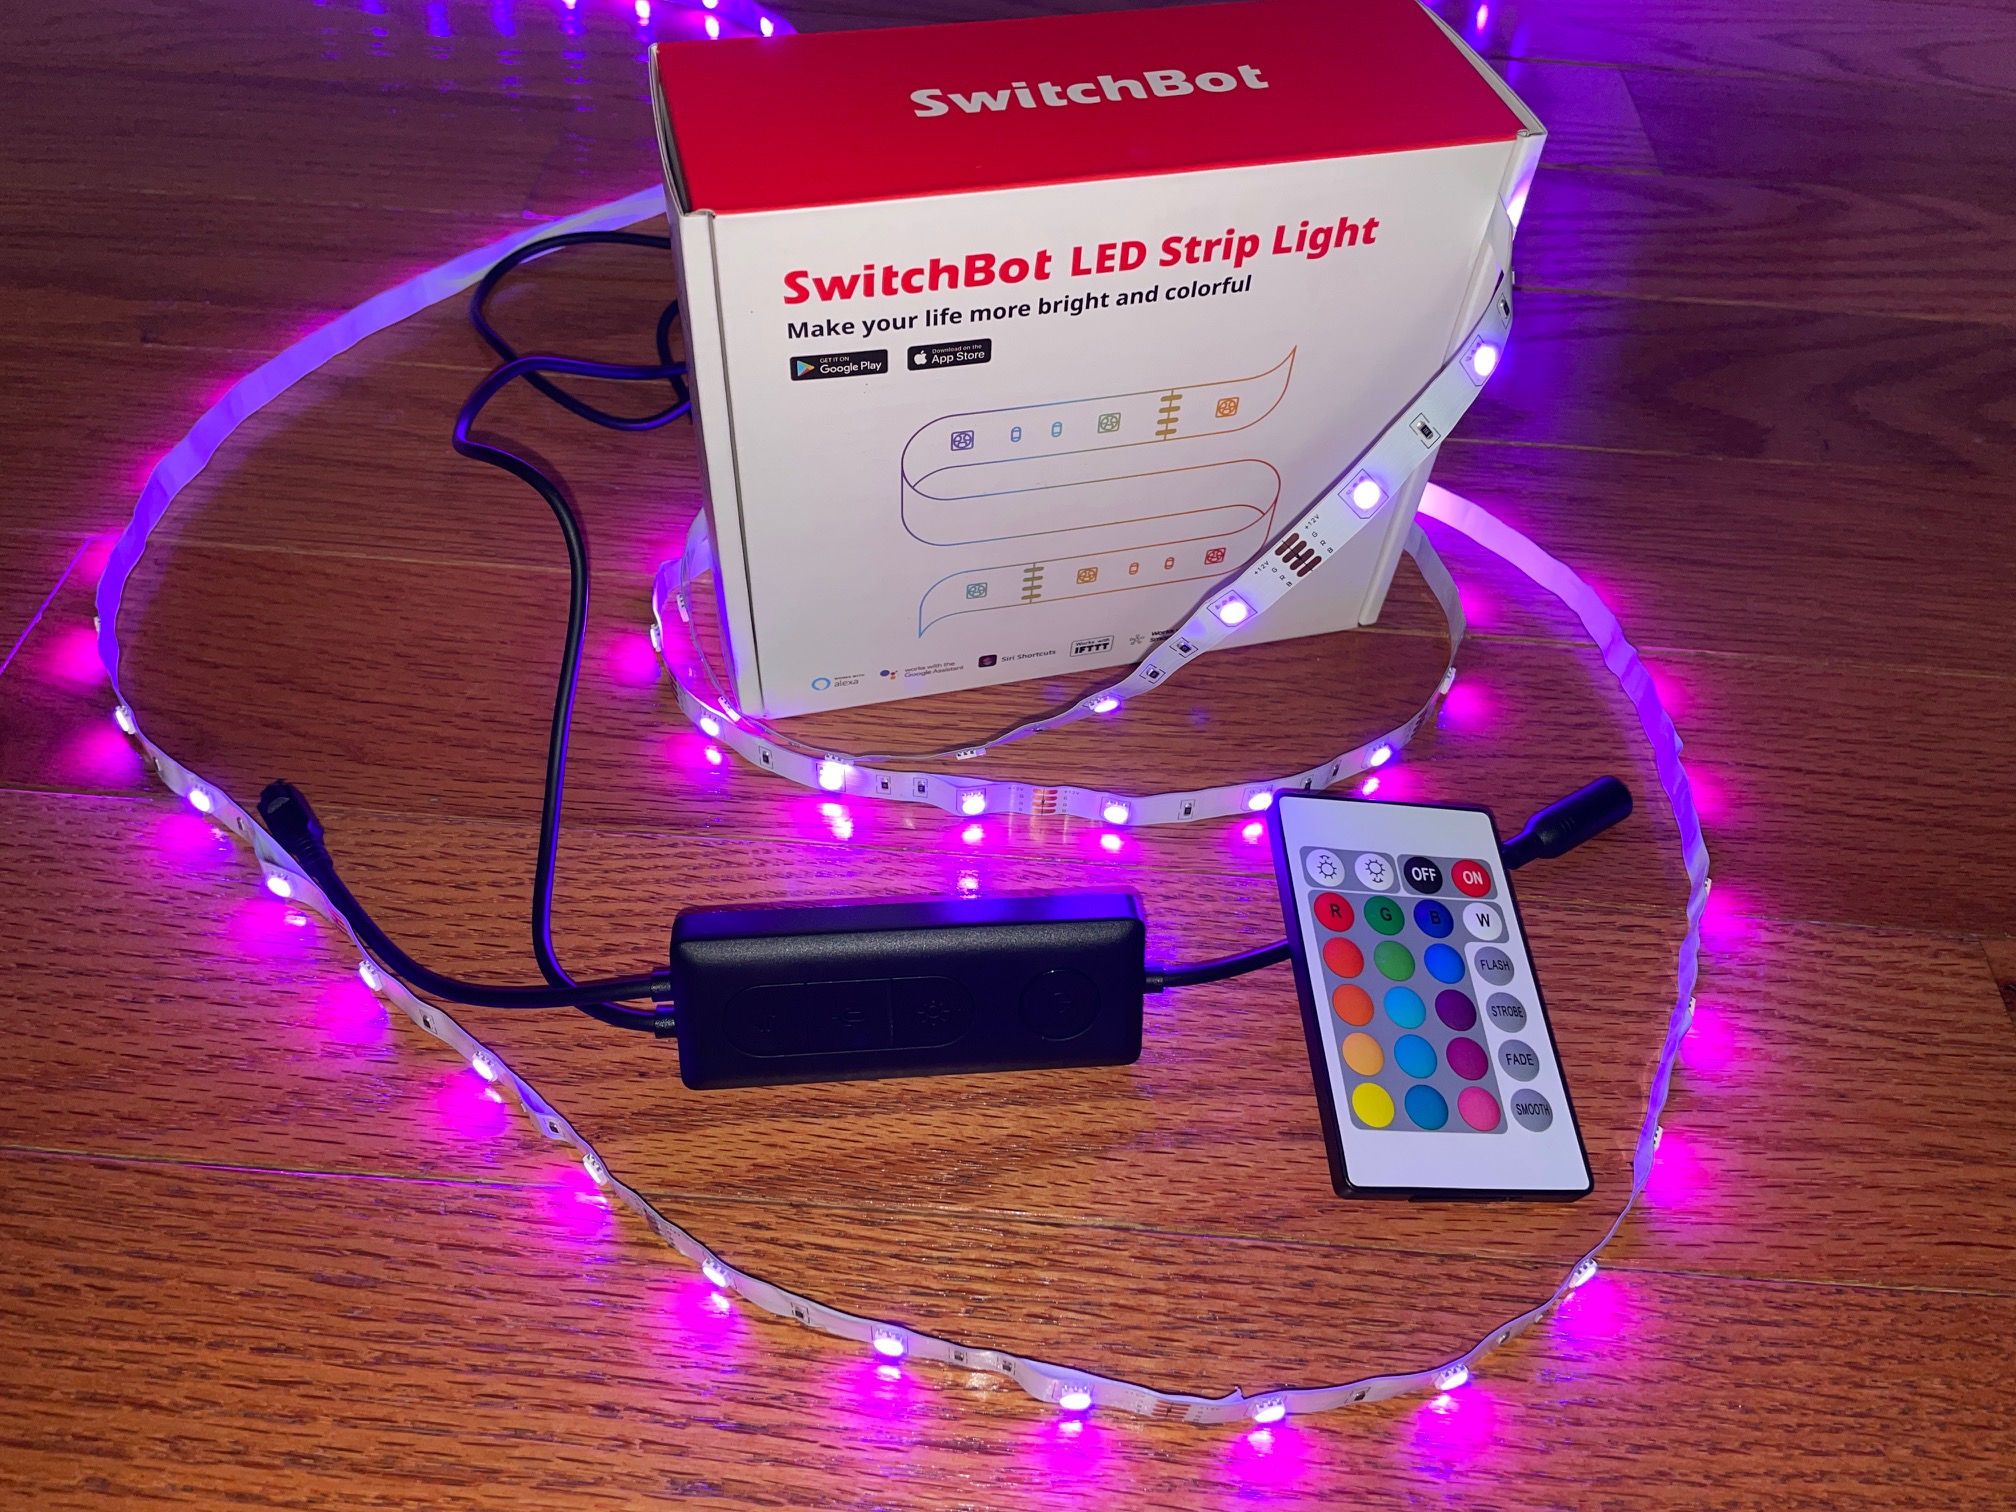 SwitchBot LED Strip Light - Add some crazy-colorful, flashy-flashy, sexy-swanky to your home! - The Gadgeteer